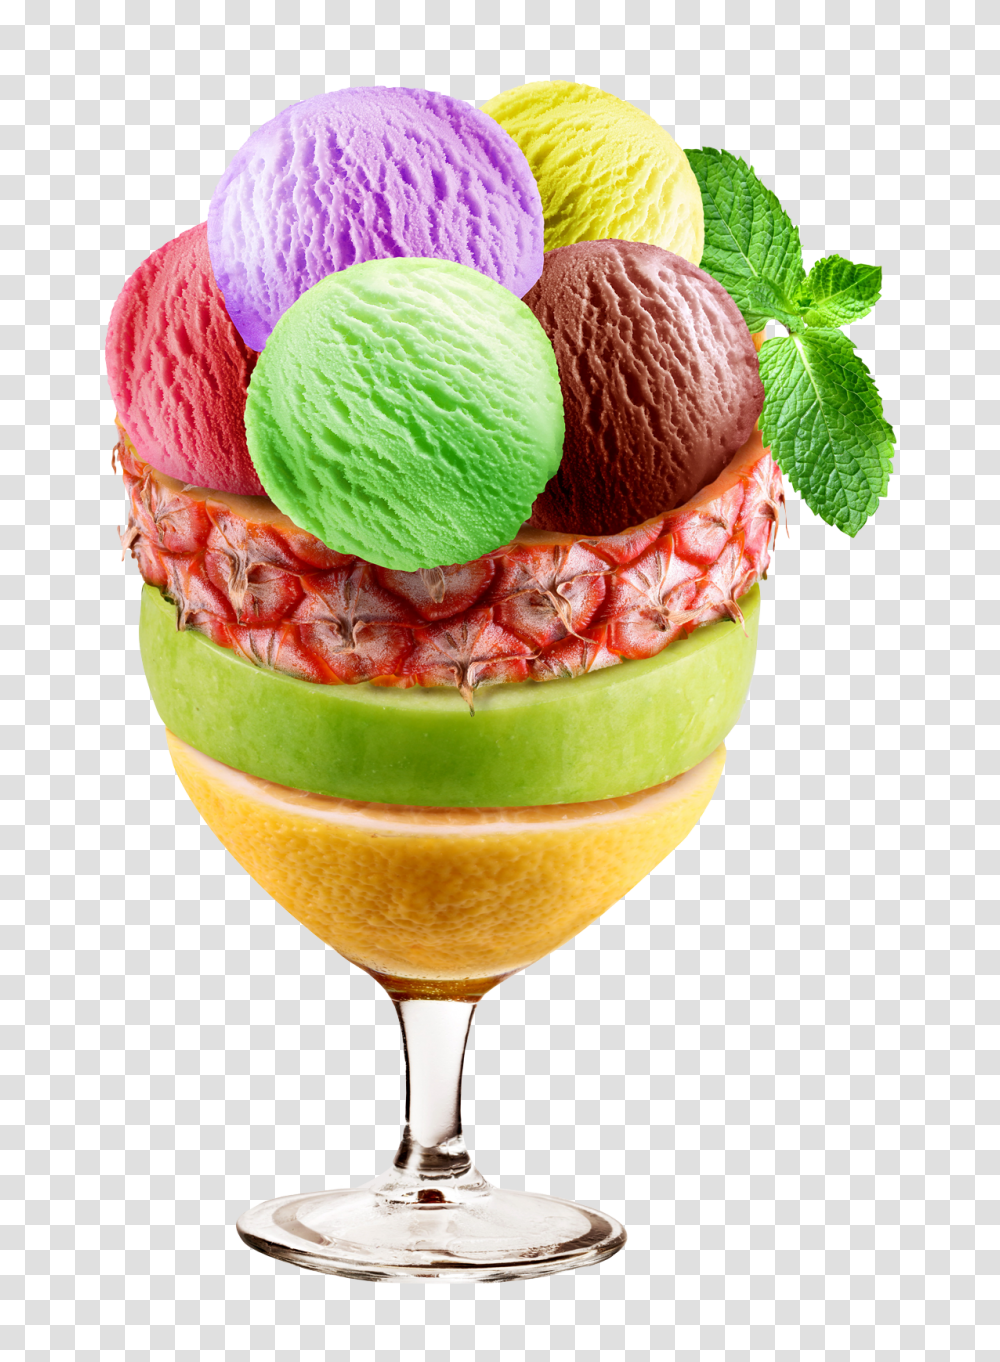 Mixed Ice Cream In Sundae Cup Image, Drink, Potted Plant, Vase, Jar Transparent Png